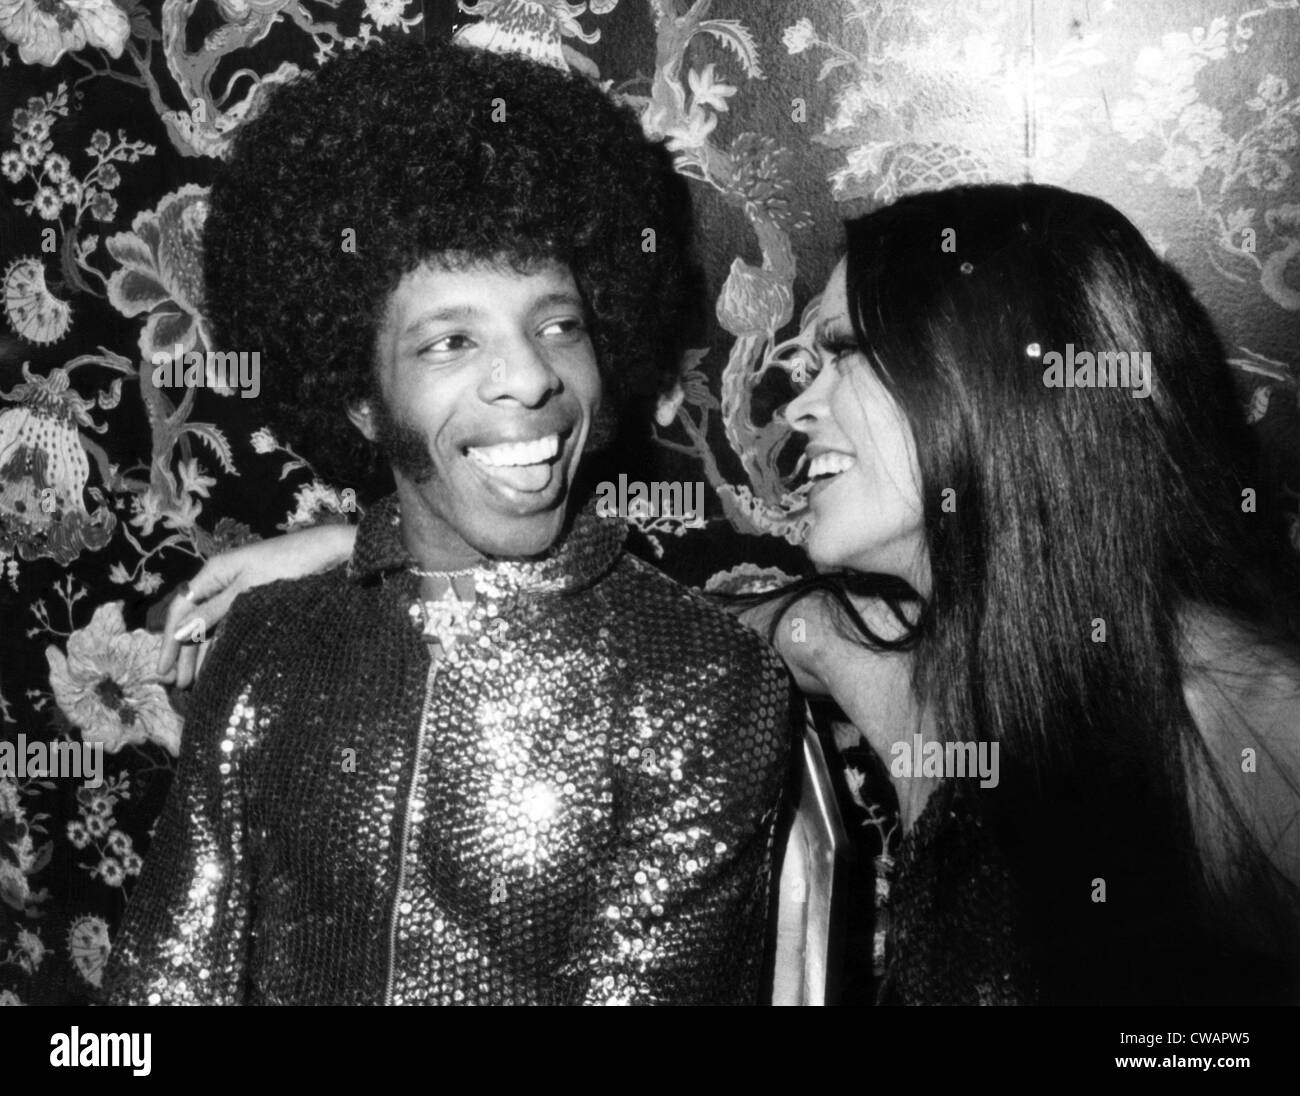 Sly Stone, of Sly & the Family Stone, and his wife, Kathy Silva, Circa 1974. Courtesy: CSU Archives/Everett Collection Stock Photo